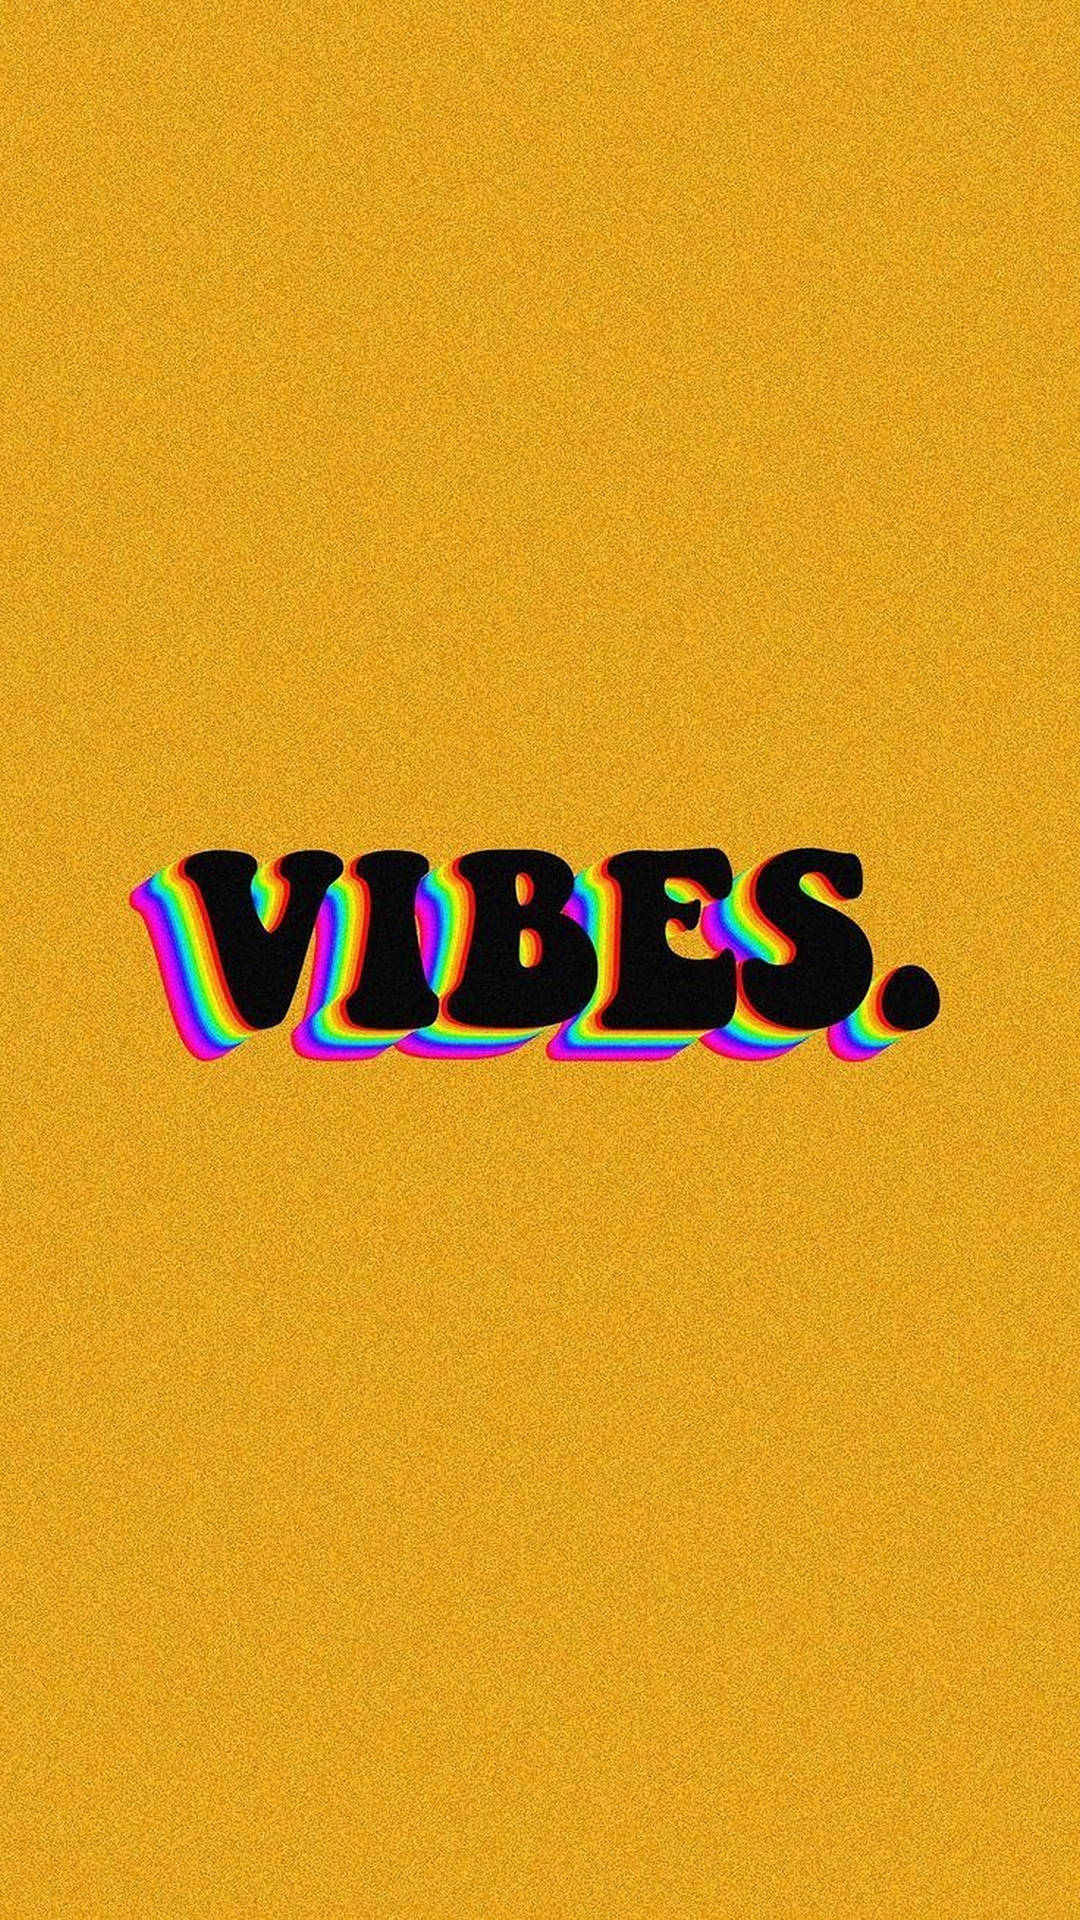 Vibes Aesthetic Words Wallpaper